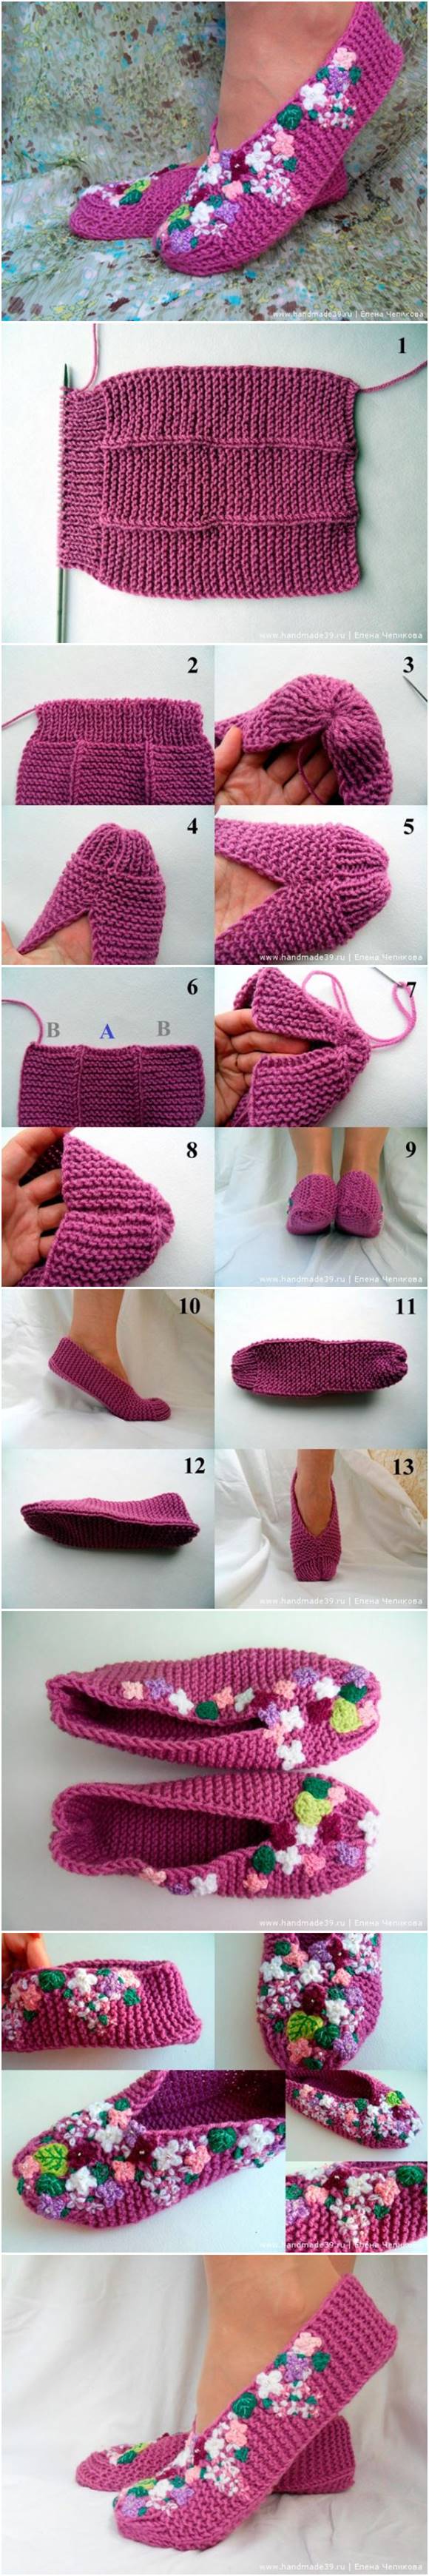 DIY Pretty Knitted Lilac Slippers